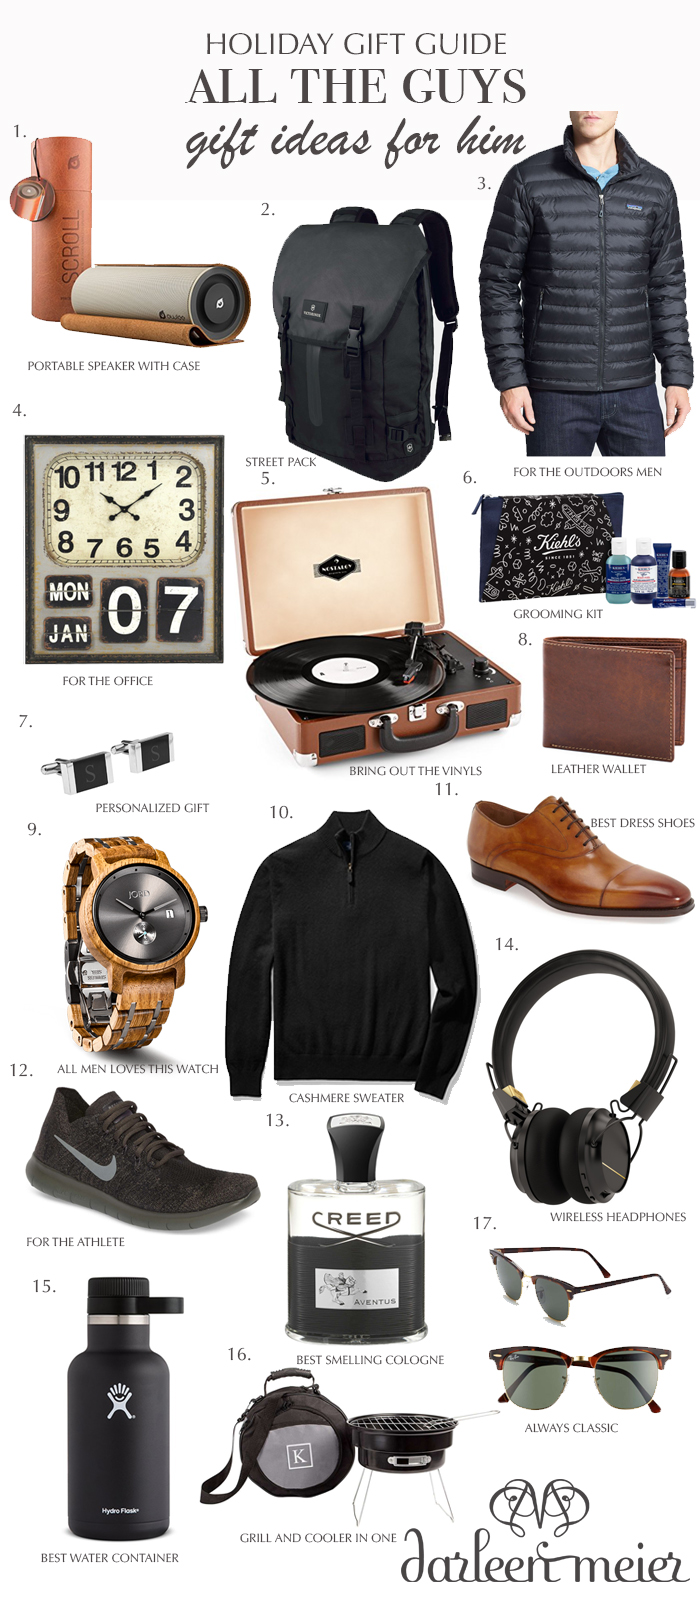 holiday gift guide for him, holiday gift guide for the guys, outdoors men, outdoor, athlete, business men, Latham interiors designs, Patagonia, sudio headphones, nike, hydro flask, vinyls, mens holiday gift guides, gift ideas for him